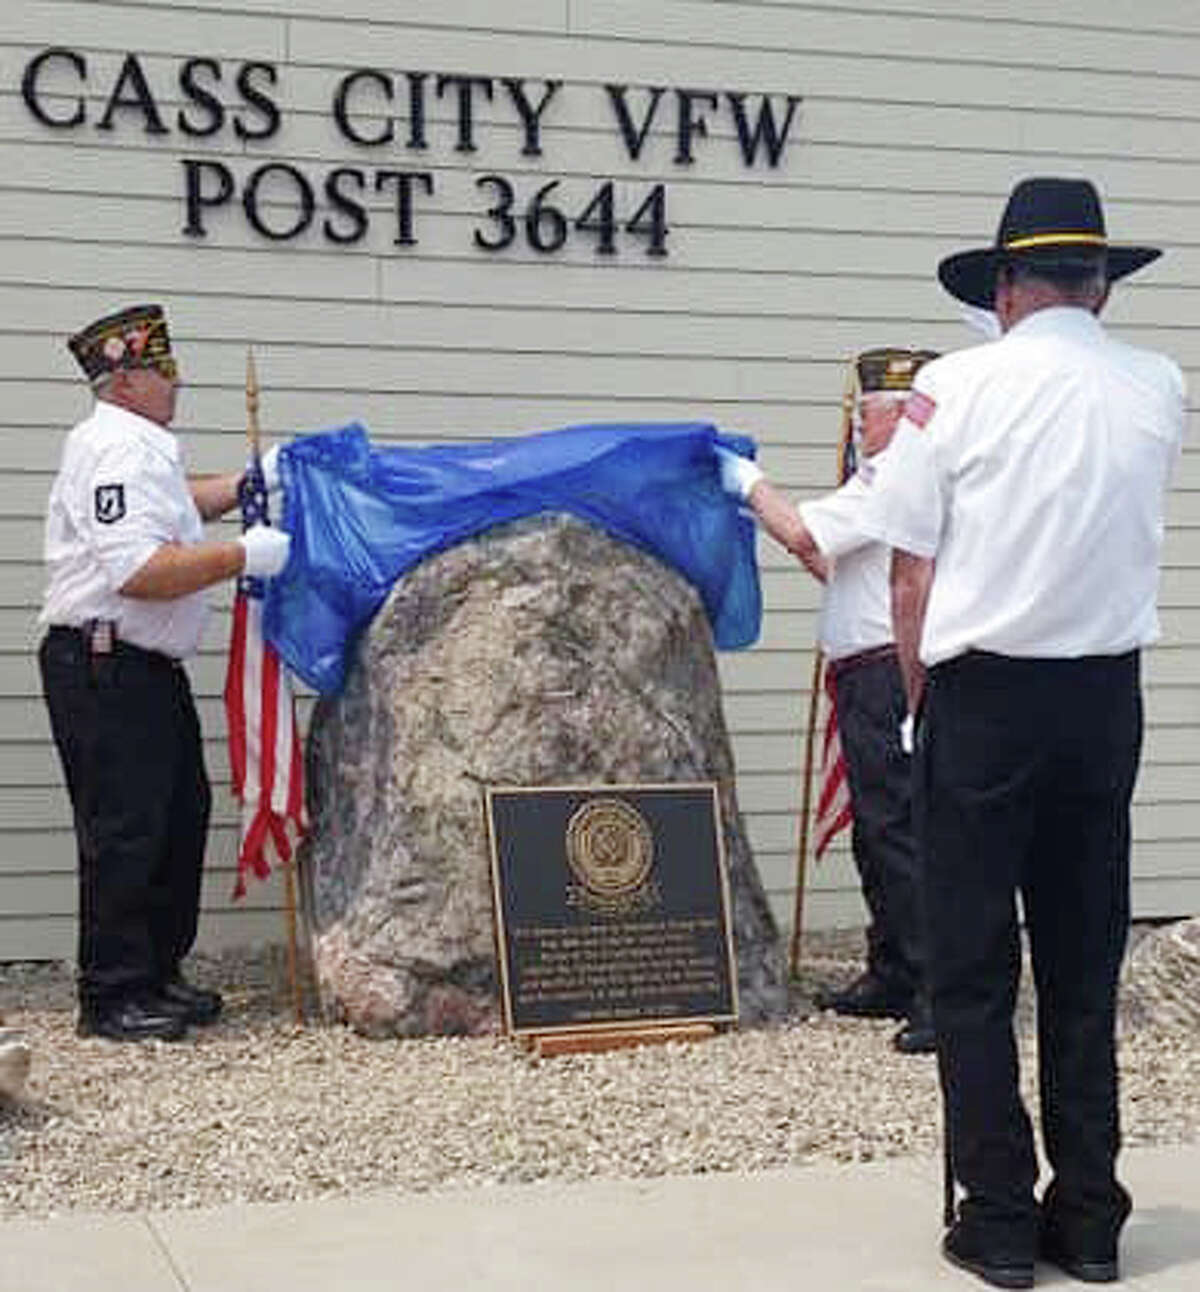 A commemorative plaque in front of the Cass City VFW Post 3644 honoring those who served in the Vietnam War was dedicated Saturday. Unveiling the monument are, from left, John Newton and Nick Pink, while VFW Commander Joe Merchant stands in front.